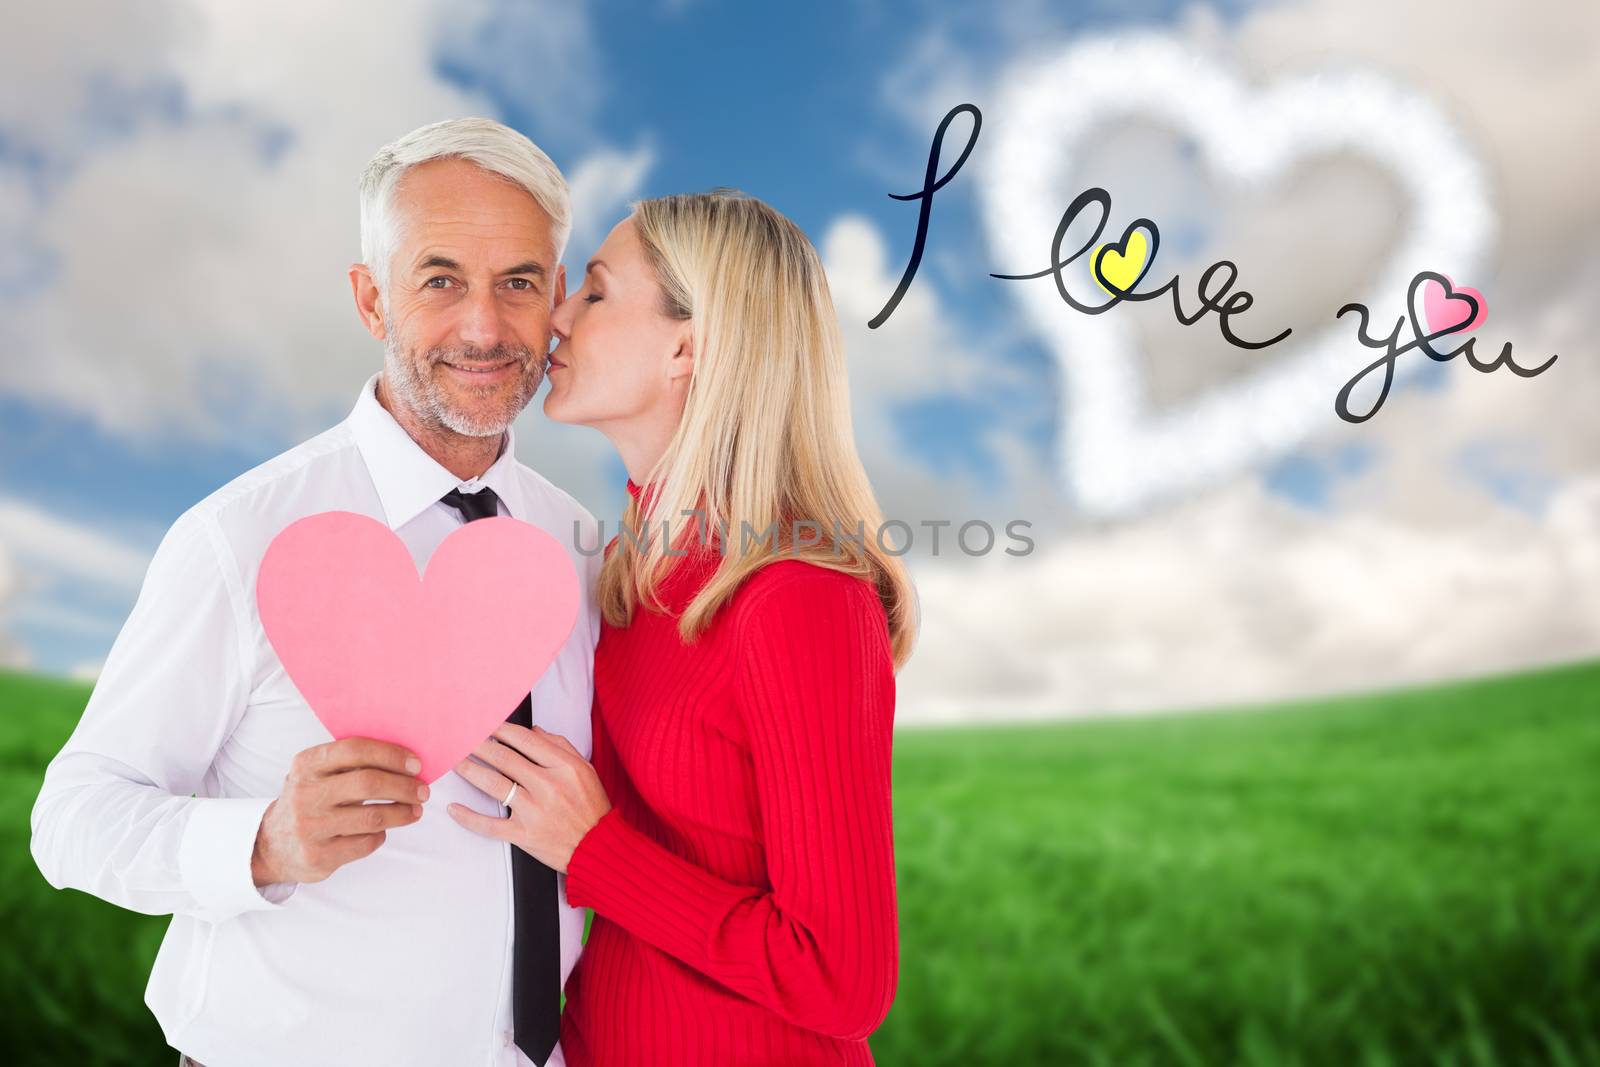 Handsome man holding paper heart getting a kiss from wife against green field under blue sky